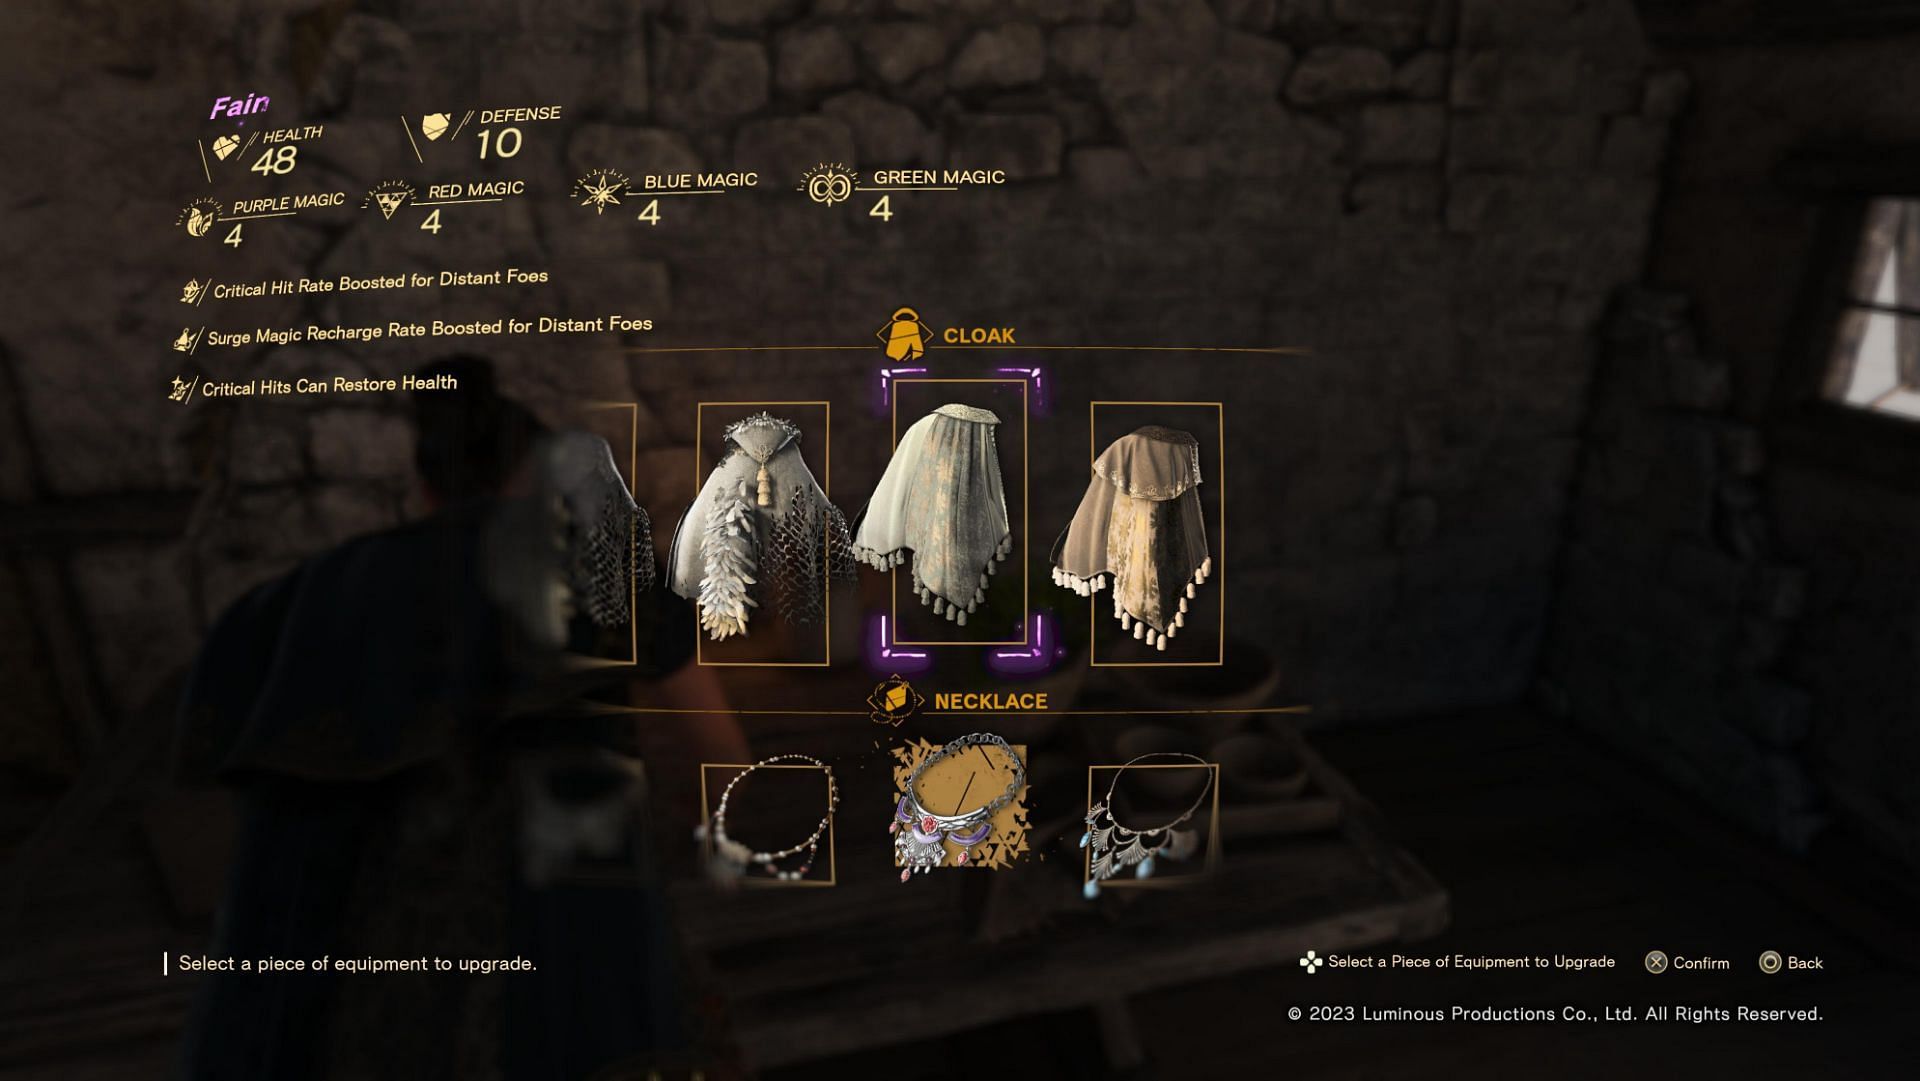 Crafting is relatively easy to understand in Forspoken.